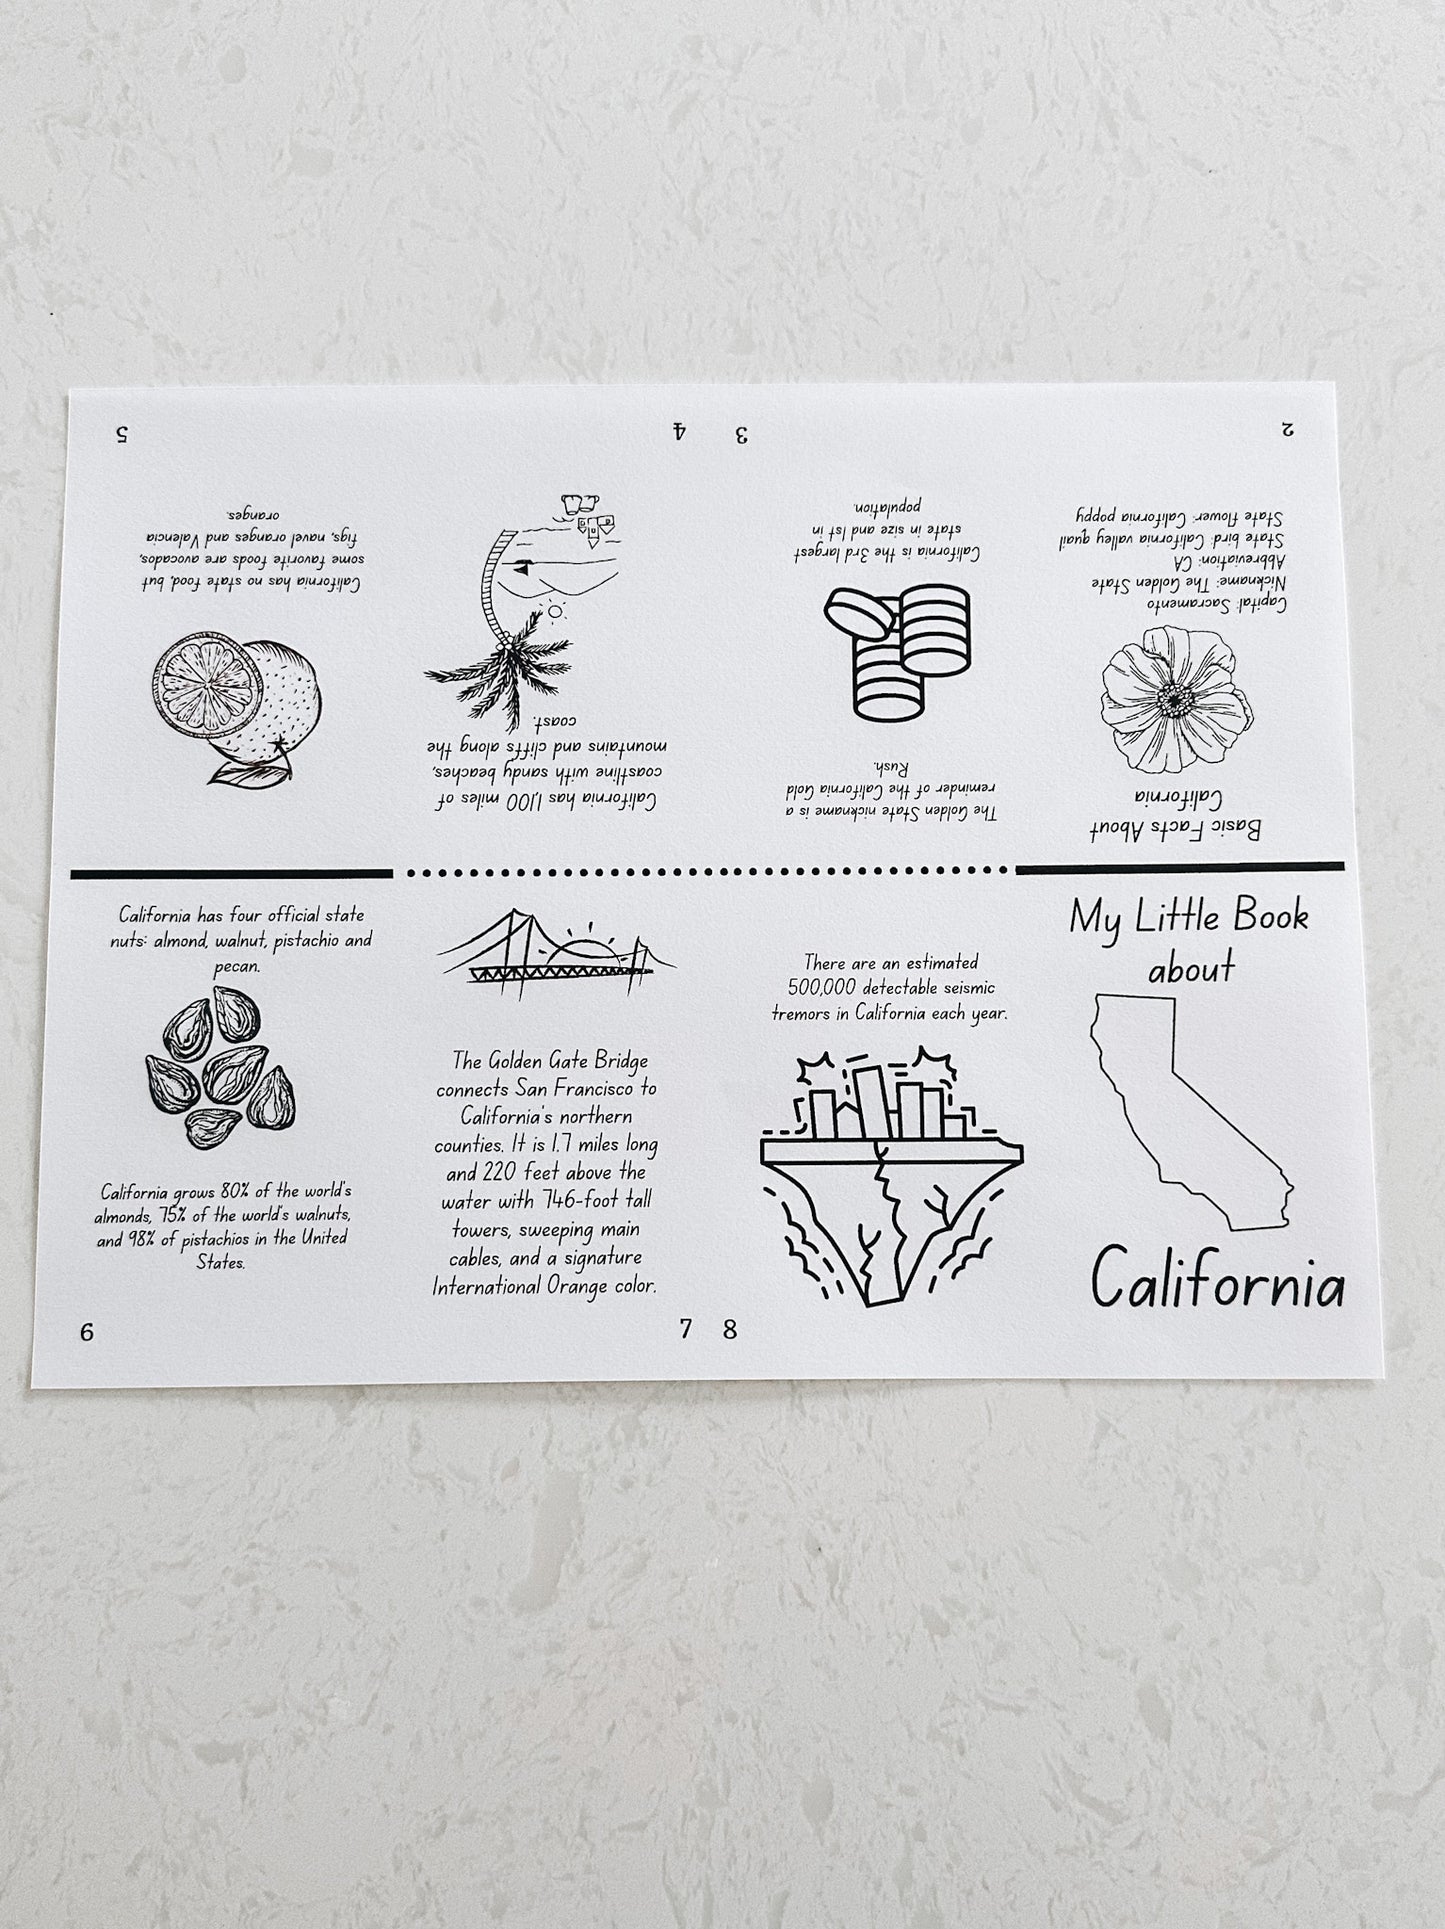 California Worksheets and Unit Study